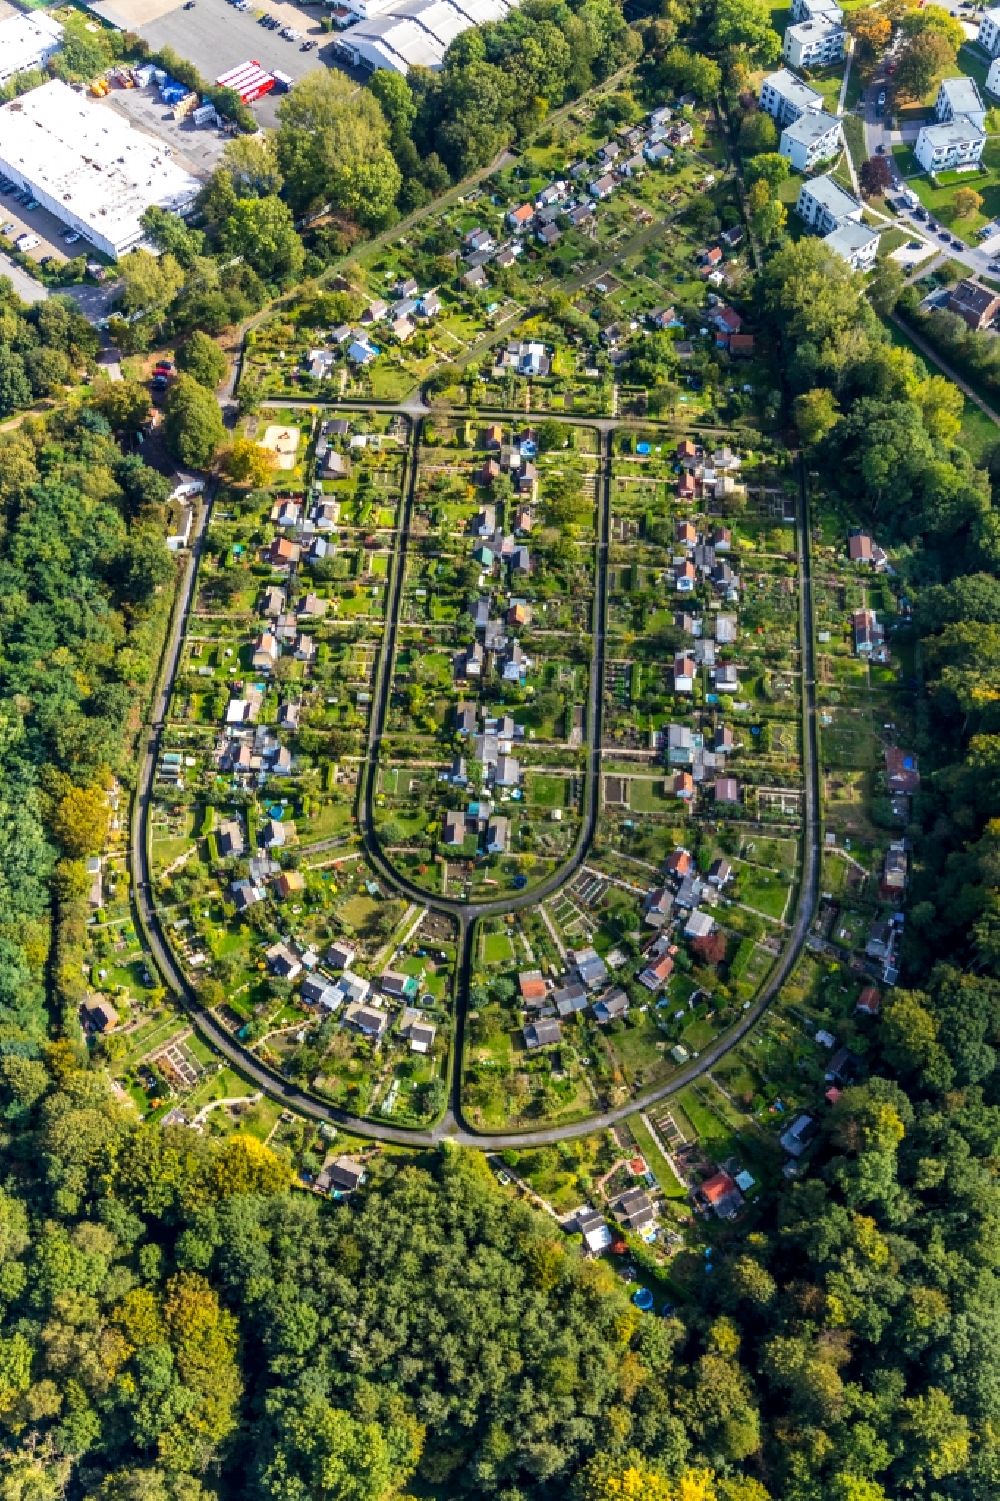 Aerial photograph Bochum - Allotments gardens plots of the association - the garden colony Kleingartenverein Rottmannshof e.V. on Harpener Heide in the district Grumme in Bochum in the state North Rhine-Westphalia, Germany